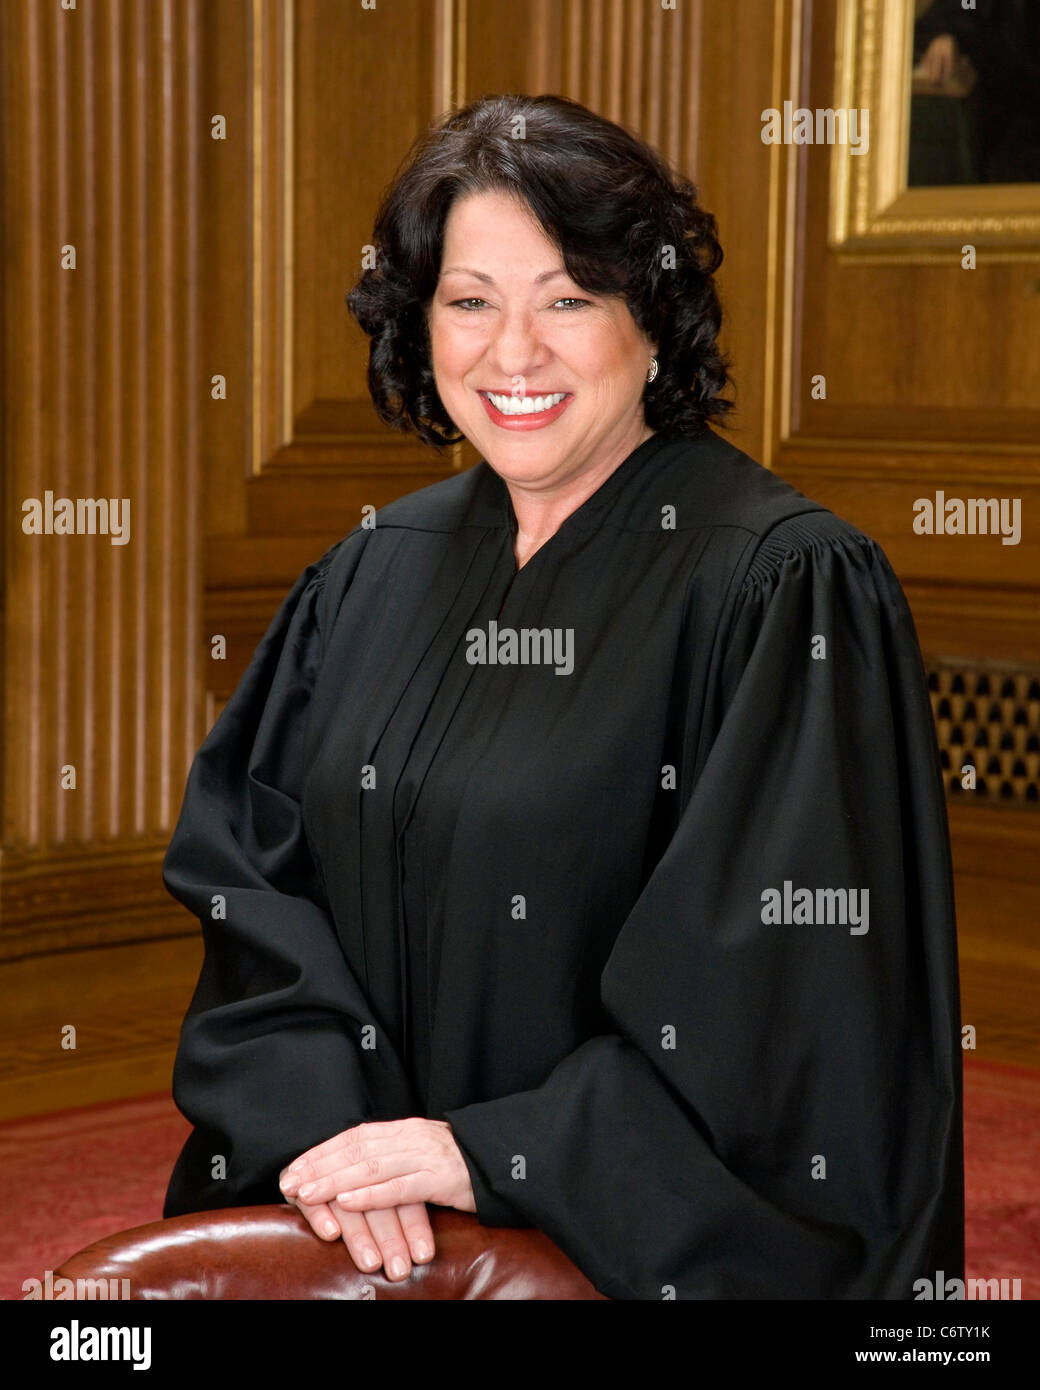 Official Portrait of United States Supreme Court Justice Sonia Maria Sotomayor Stock Photo